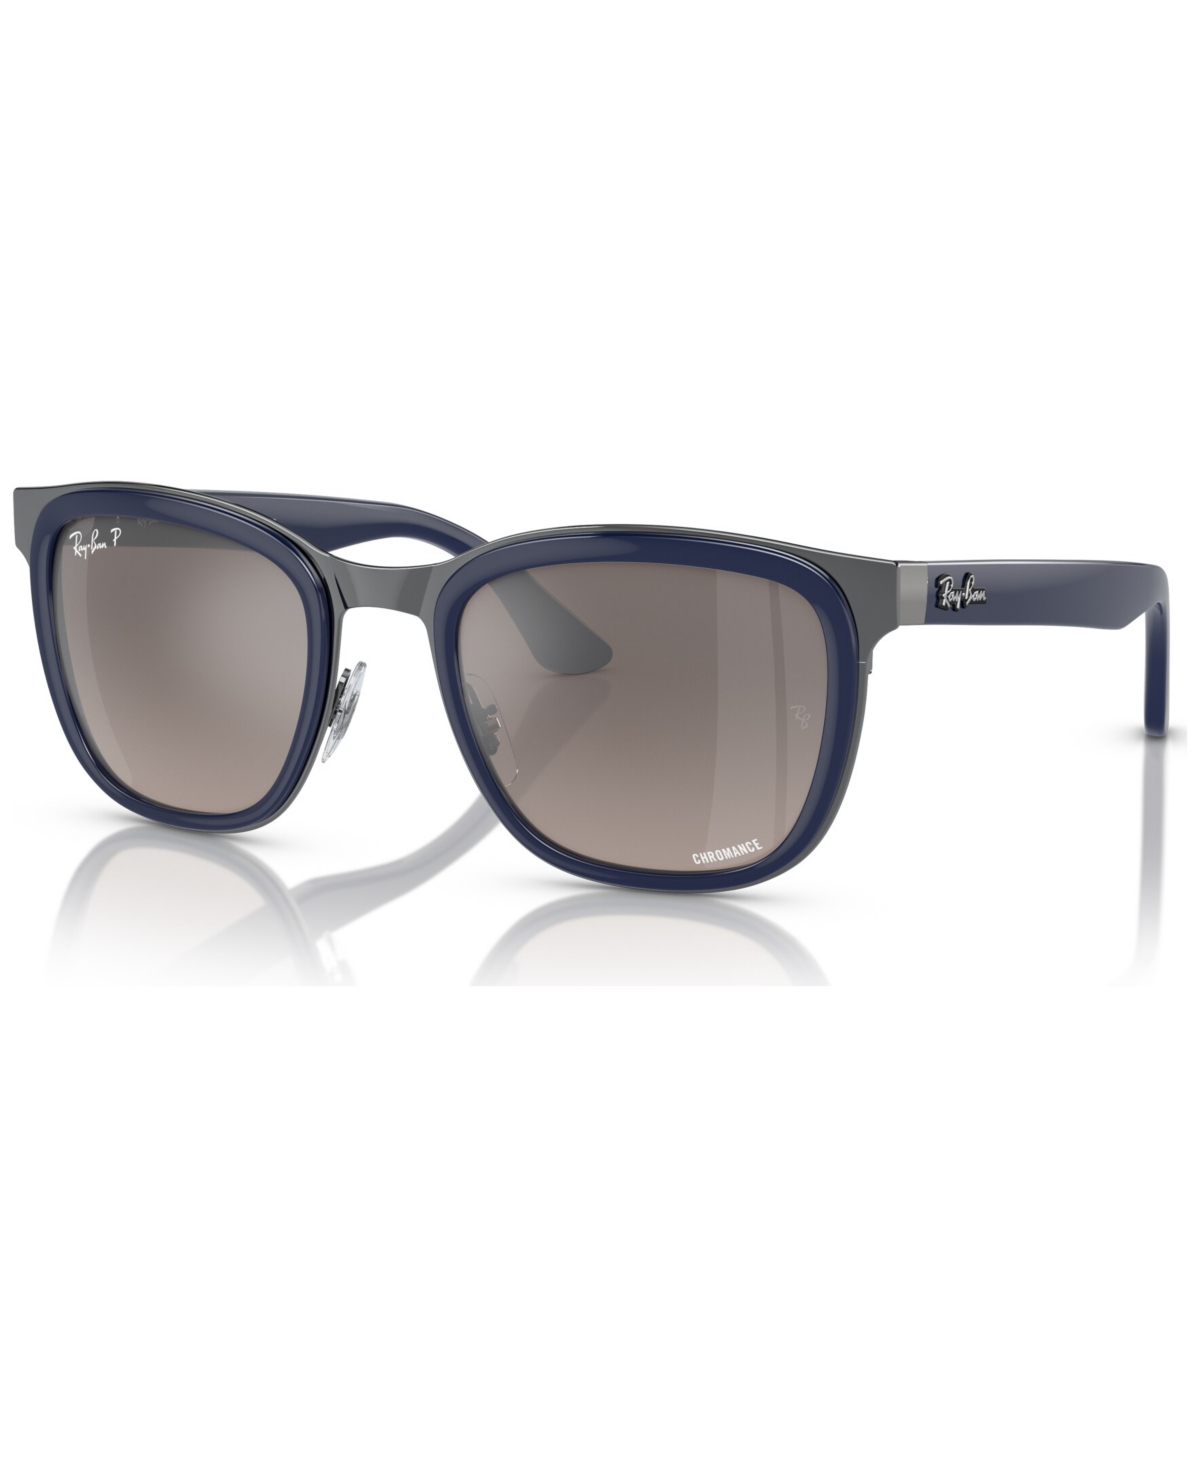 Ray Ban Unisex Polarized Sunglasses, Clyde In Blue On Gunmetal